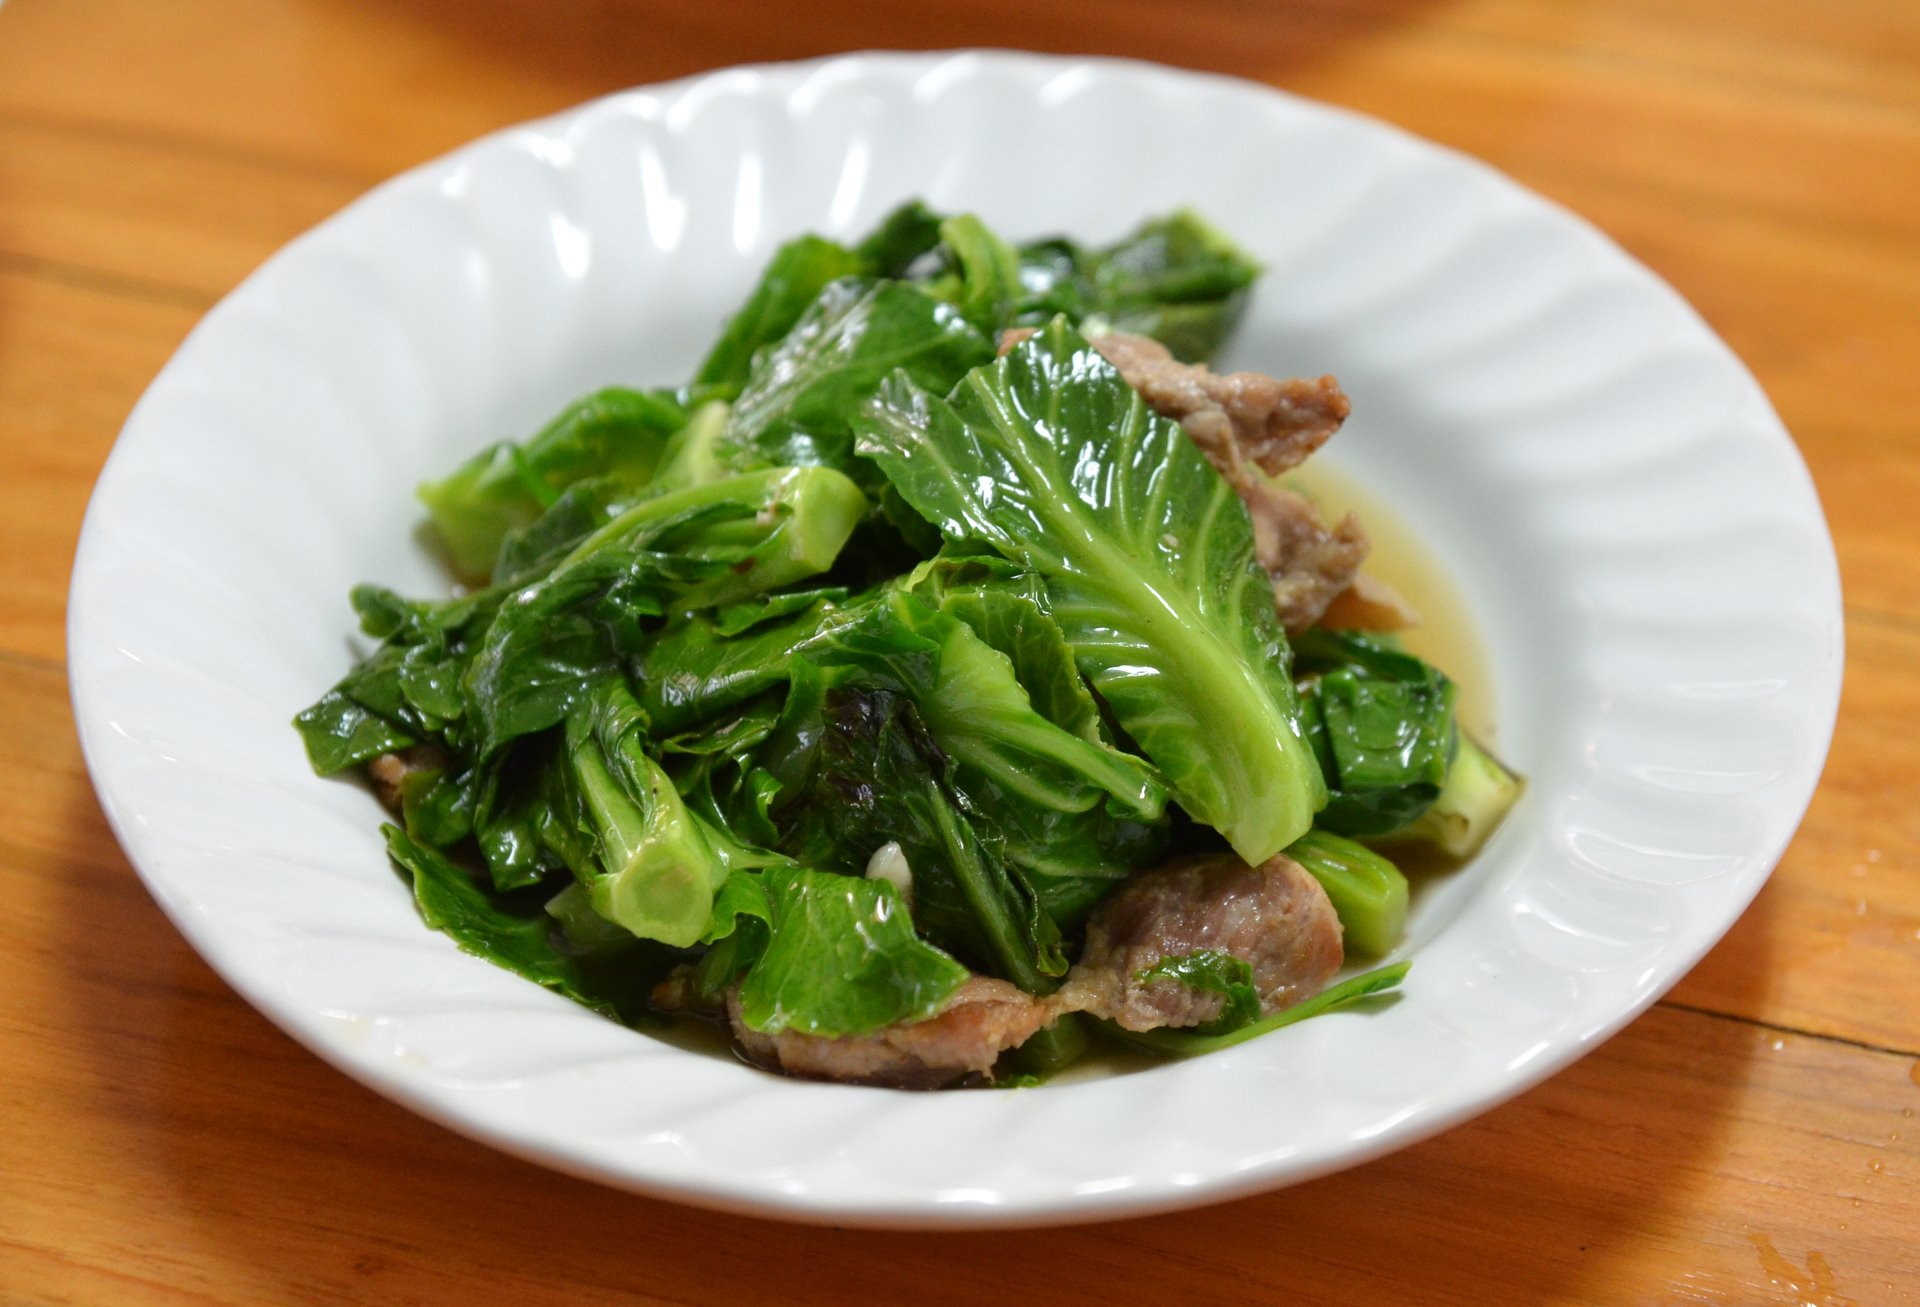 Authentic Thai Recipe for Stir-fried Chinese Broccoli Leaves with Pork